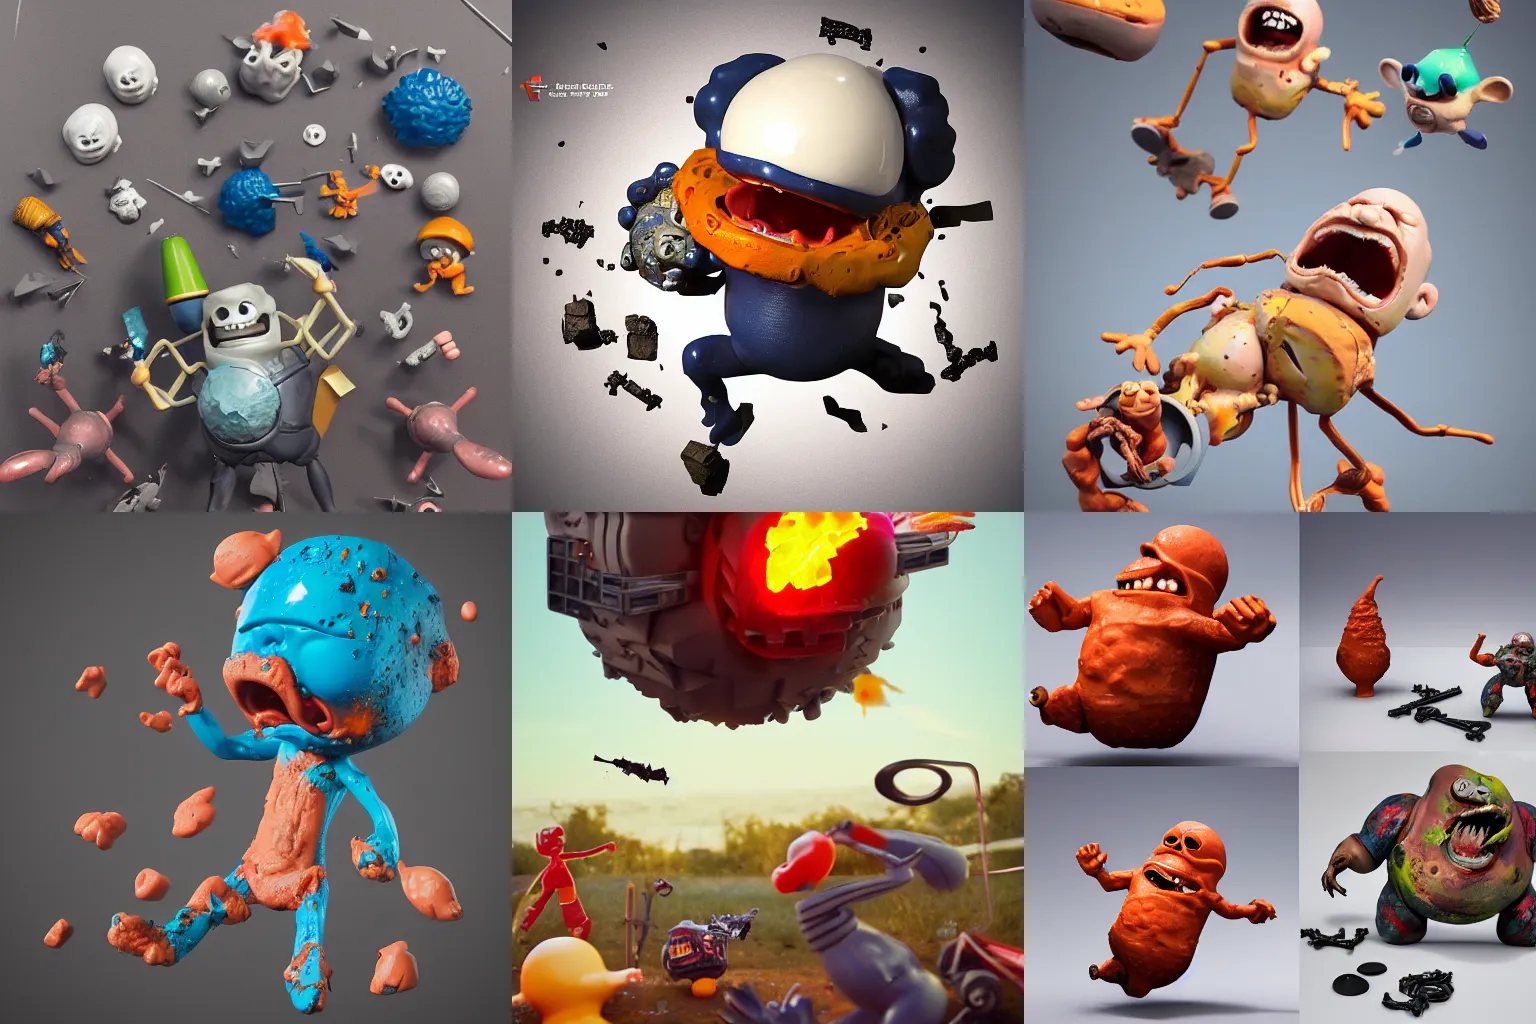 Prompt: dissection of angry screaming ceramic exploding crash miniature toy resin Figure falling apart, c4d, 3d primitives, in a Studio hollow, surrounded by flying parts, explosion drawing, by pixar, beeple, by jeff koons, blender donut tutorial, by noah bradley